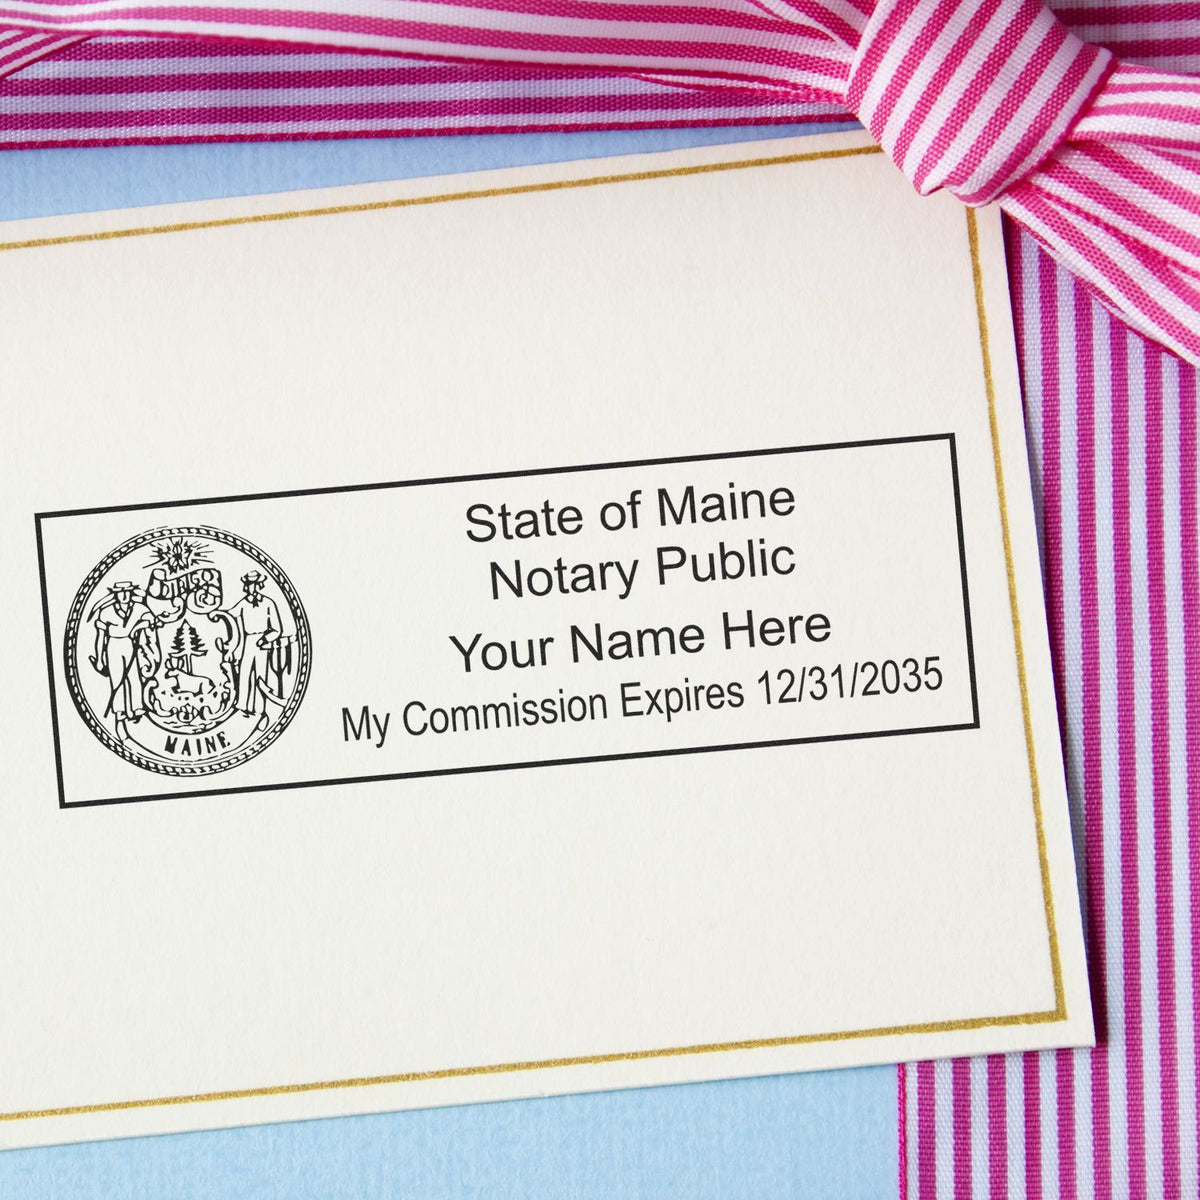 This paper is stamped with a sample imprint of the Super Slim Maine Notary Public Stamp, signifying its quality and reliability.